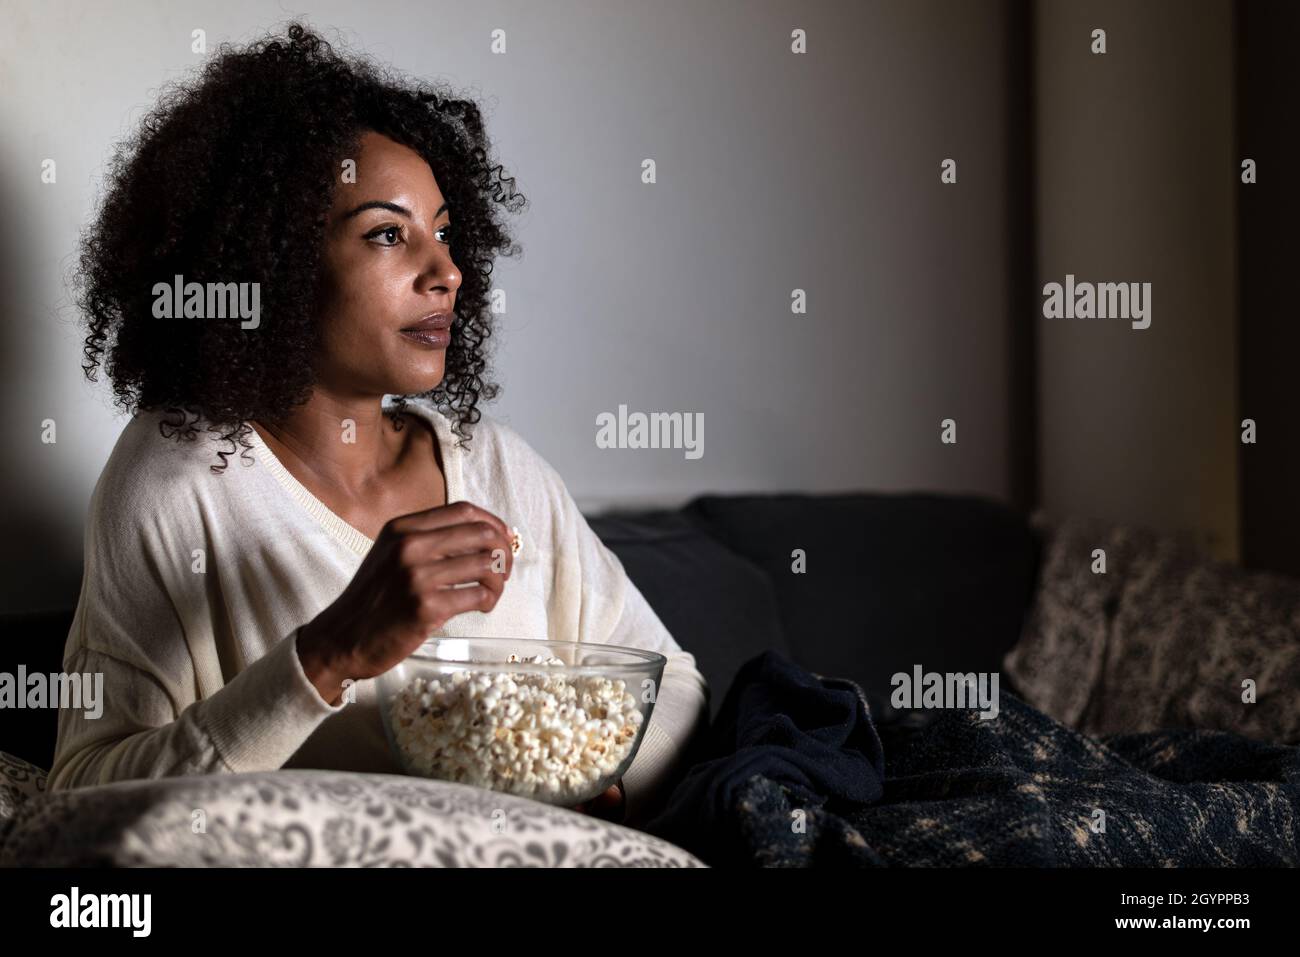 horizontal portrait of an african american woman sitting on a sofa. Face is lit up with TV light. She is holding a bowl of popcorn Stock Photo